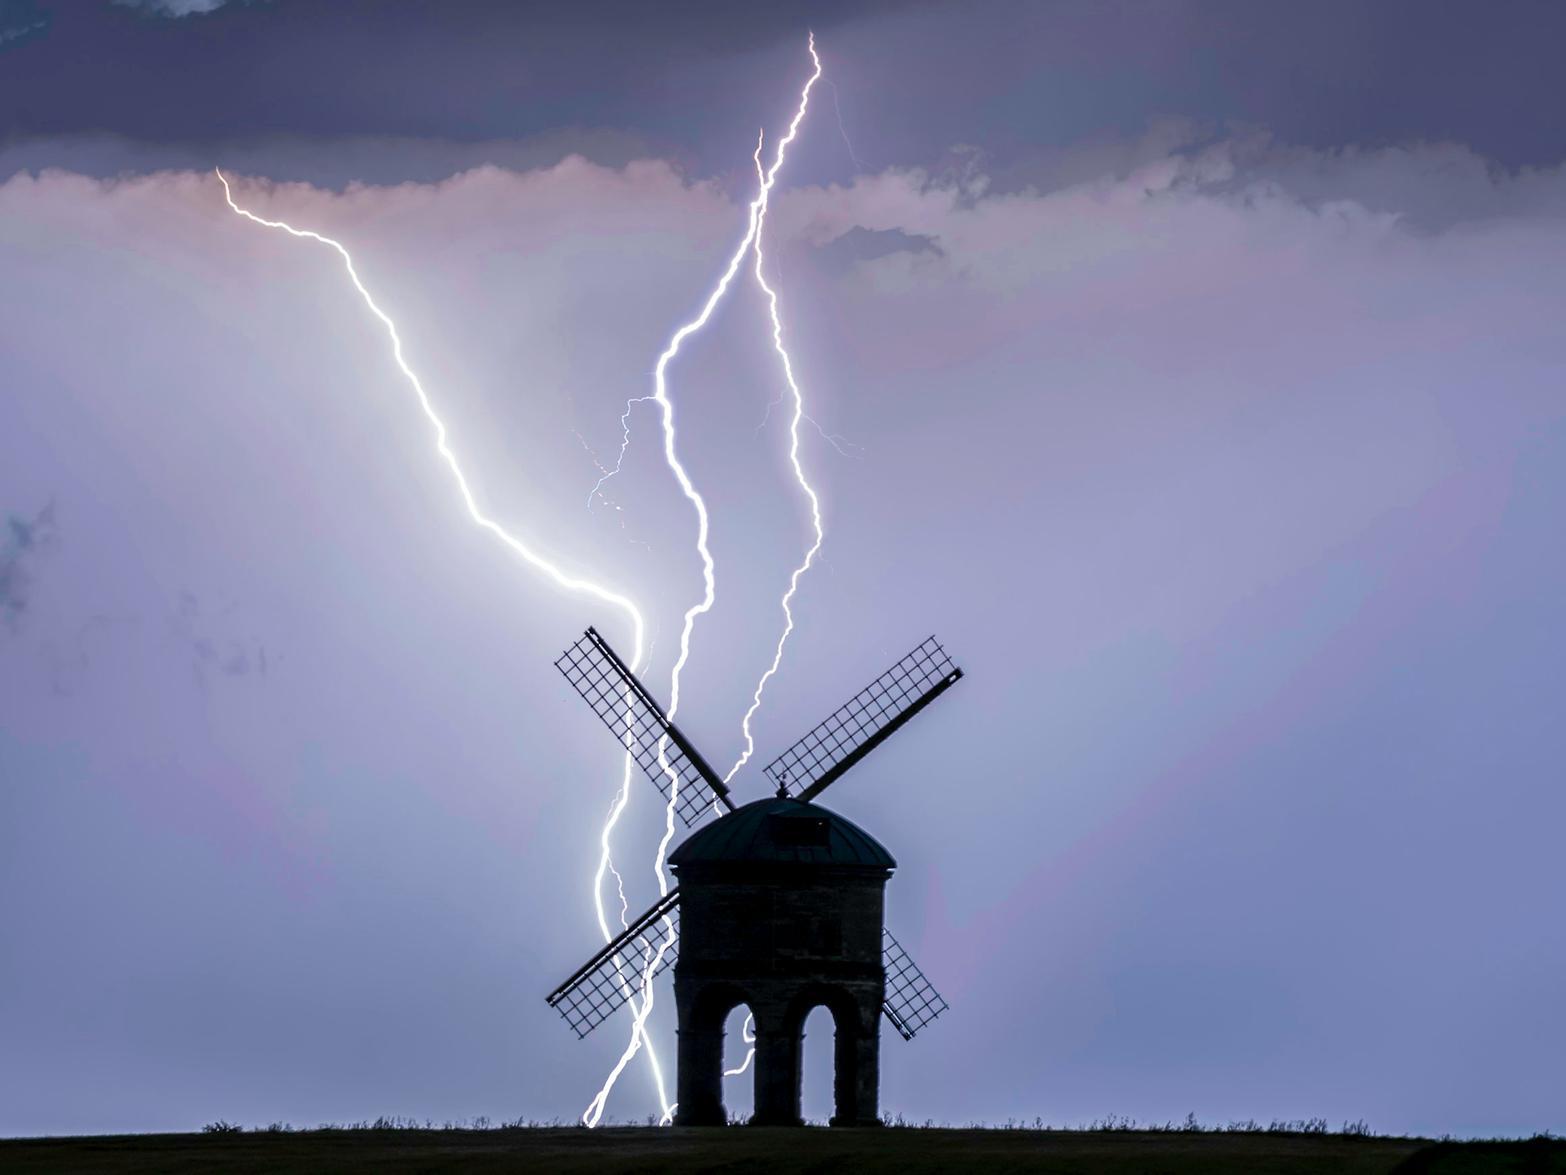 This stunning image captured the moment lightning struck at a historic windmill as heavy thunderstorms battered Britain in July.
The breathtaking spectacle was captured by Chad Gordon Higgins at the 17th century Grade I listed Chesterton Windmill near Leamington.
The timelapse photographer travelled up from his home in Surbiton, London to capture the lightning storm at his favourite beauty spot.
And after waiting for around six hours he was delighted when he was able to capture a flash of fork lightning illuminating the night sky in the distance at around 2am.